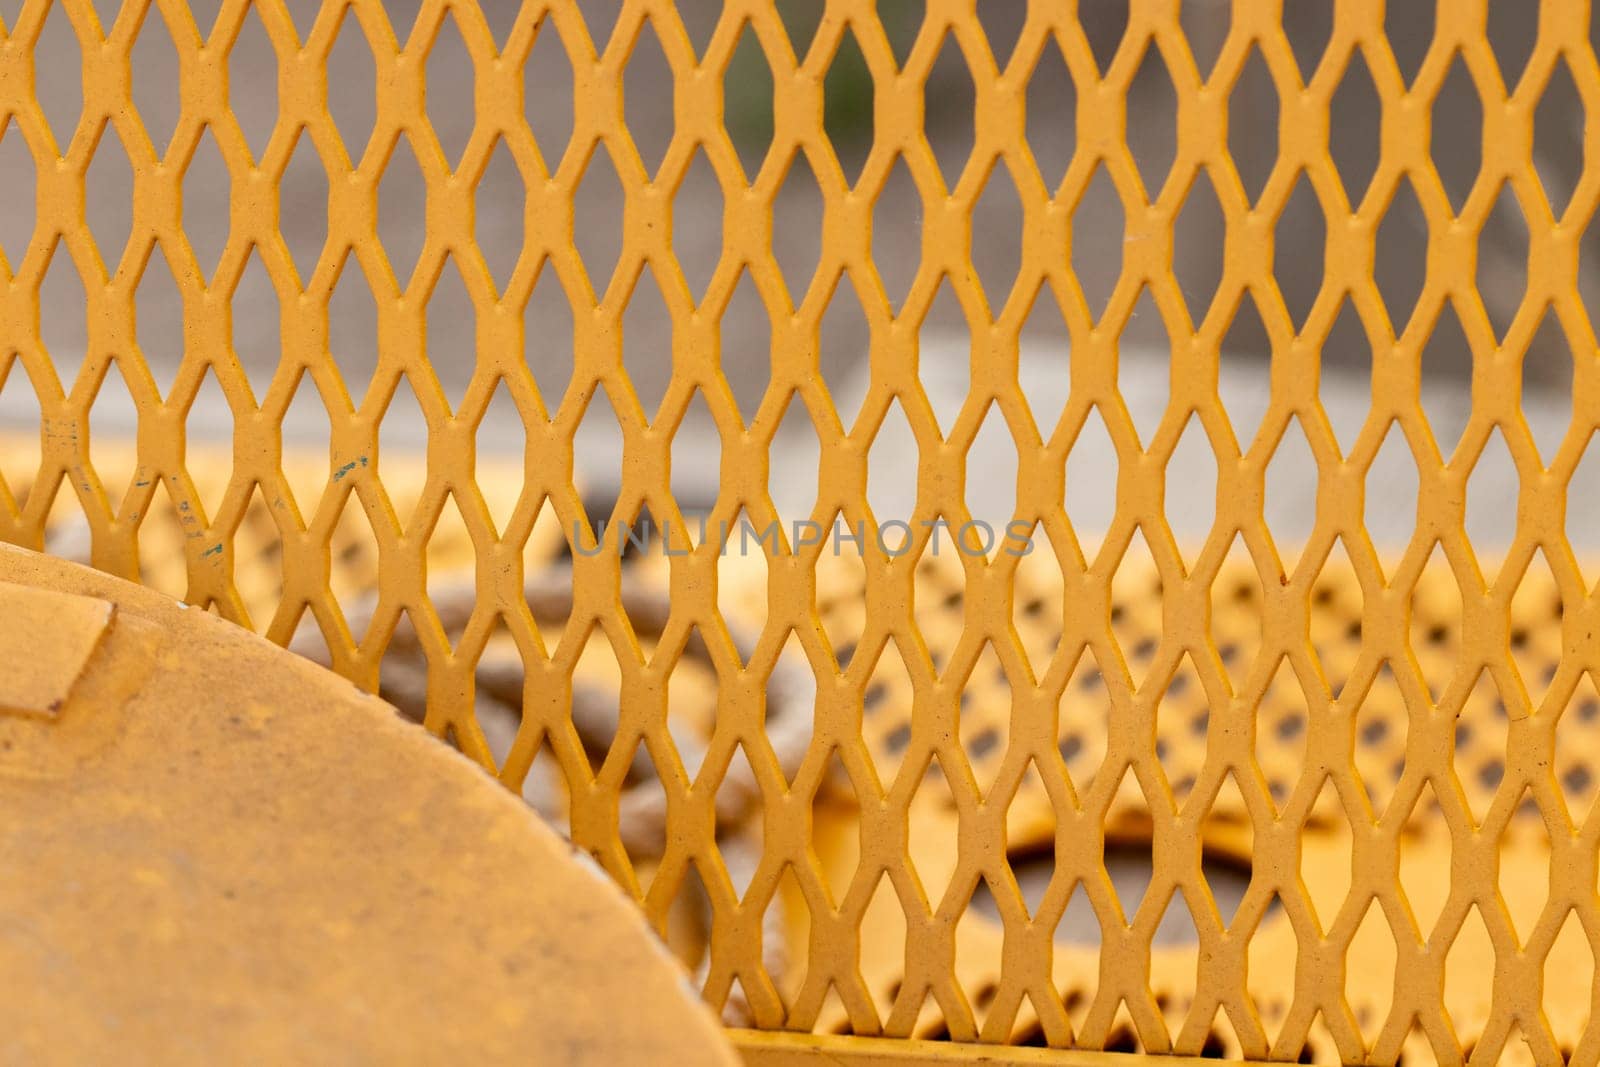 steel mesh background close up of belt guard cover on machine by gena_wells